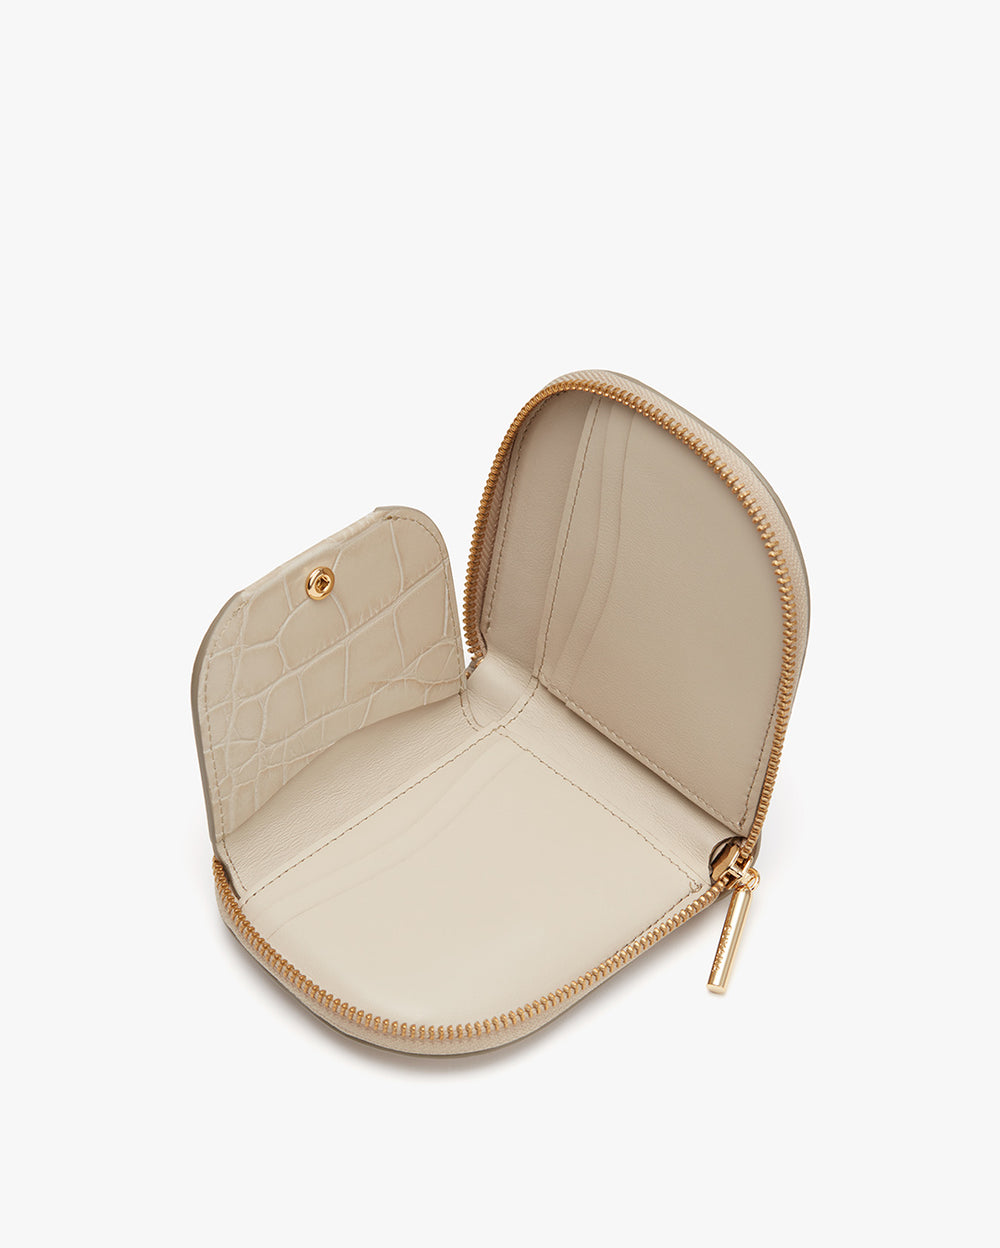 Open small heart-shaped case with zipper and interior pockets.